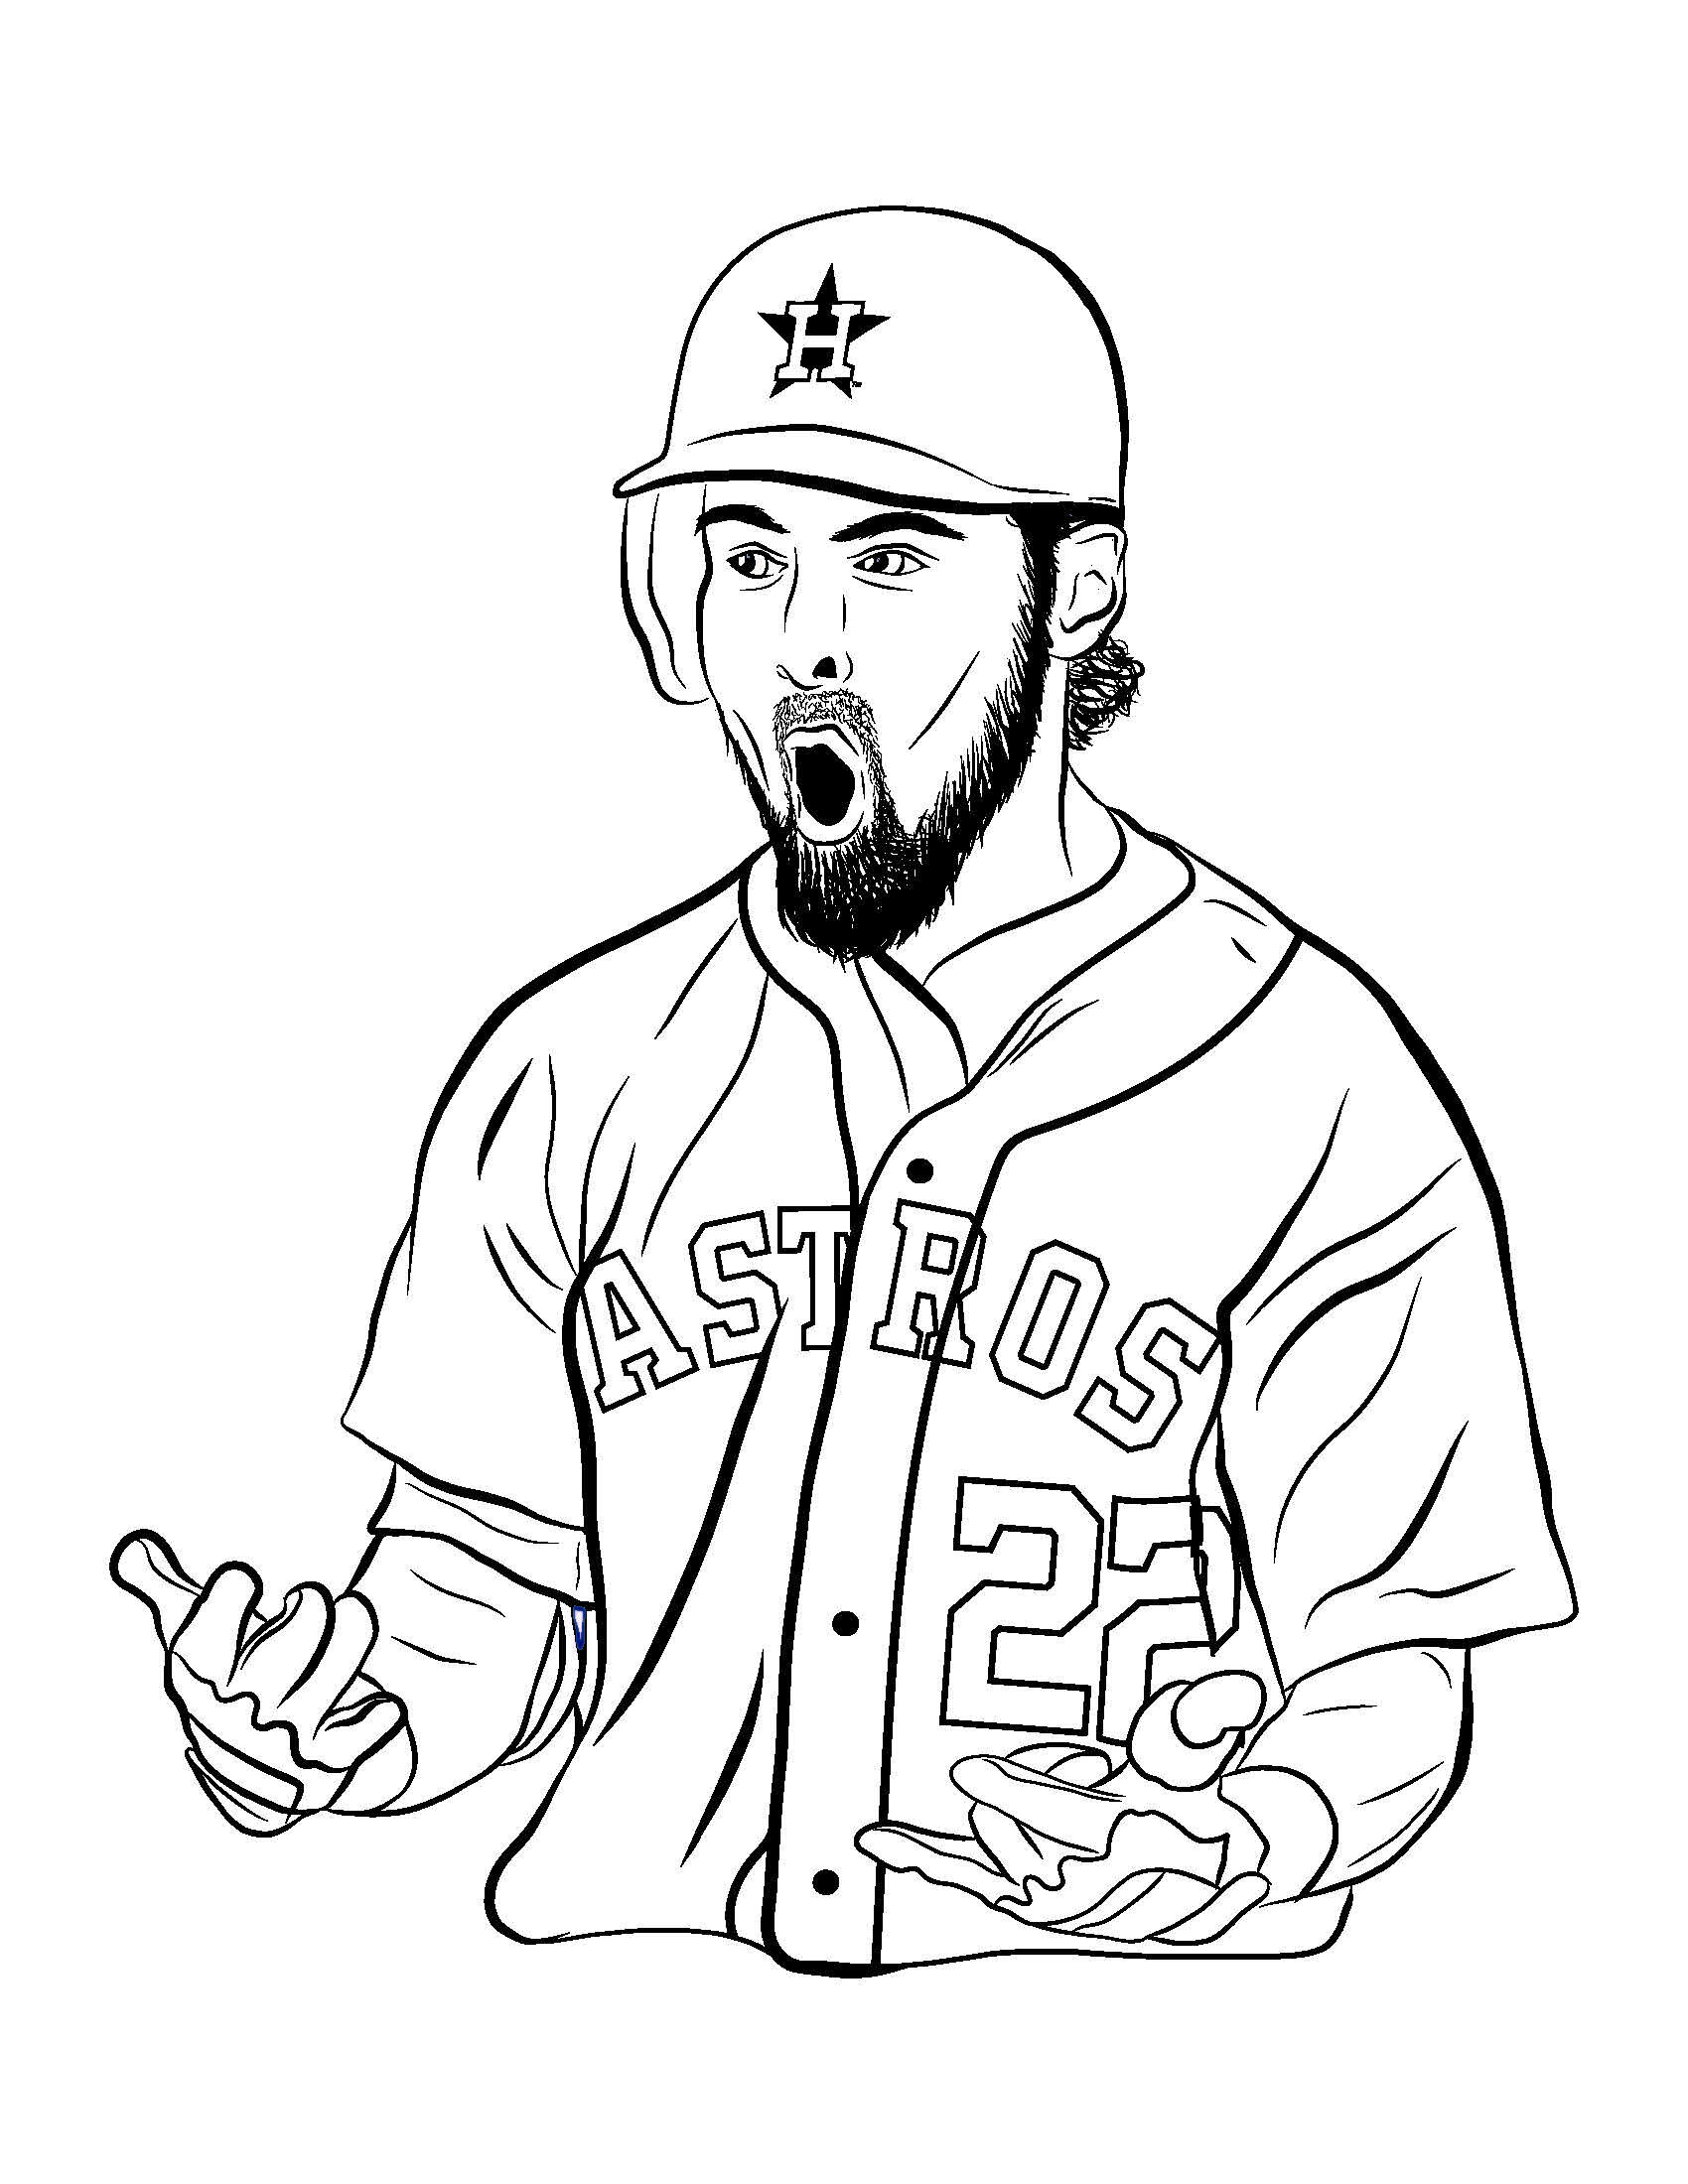 Free Astros Coloring Pages Pdf - houston astros player coloring pages